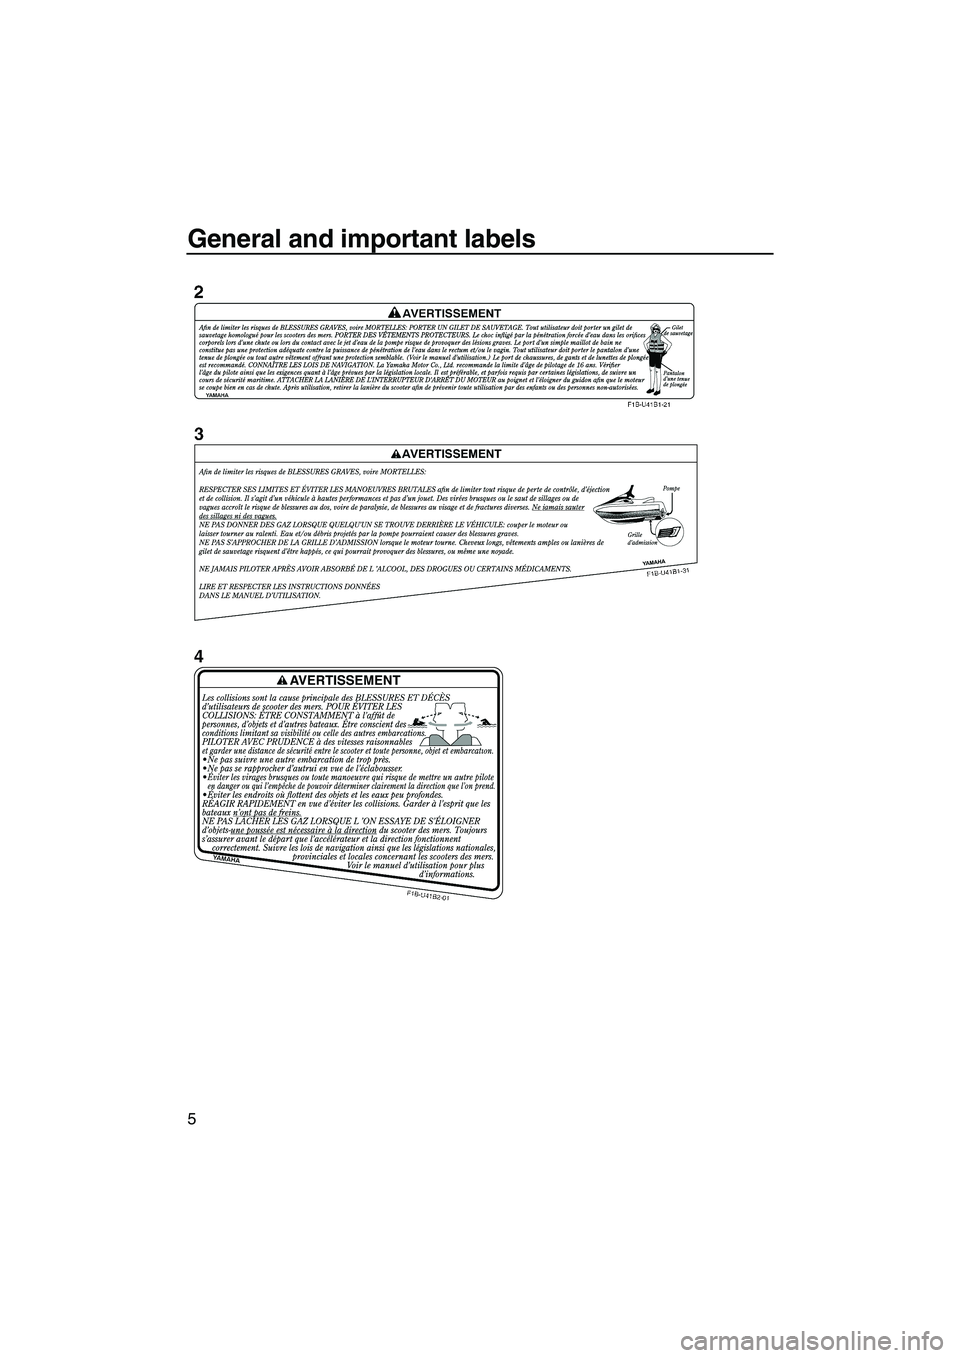 YAMAHA SVHO 2009 User Guide General and important labels
5
UF1W71E0.book  Page 5  Tuesday, June 24, 2008  11:46 AM 